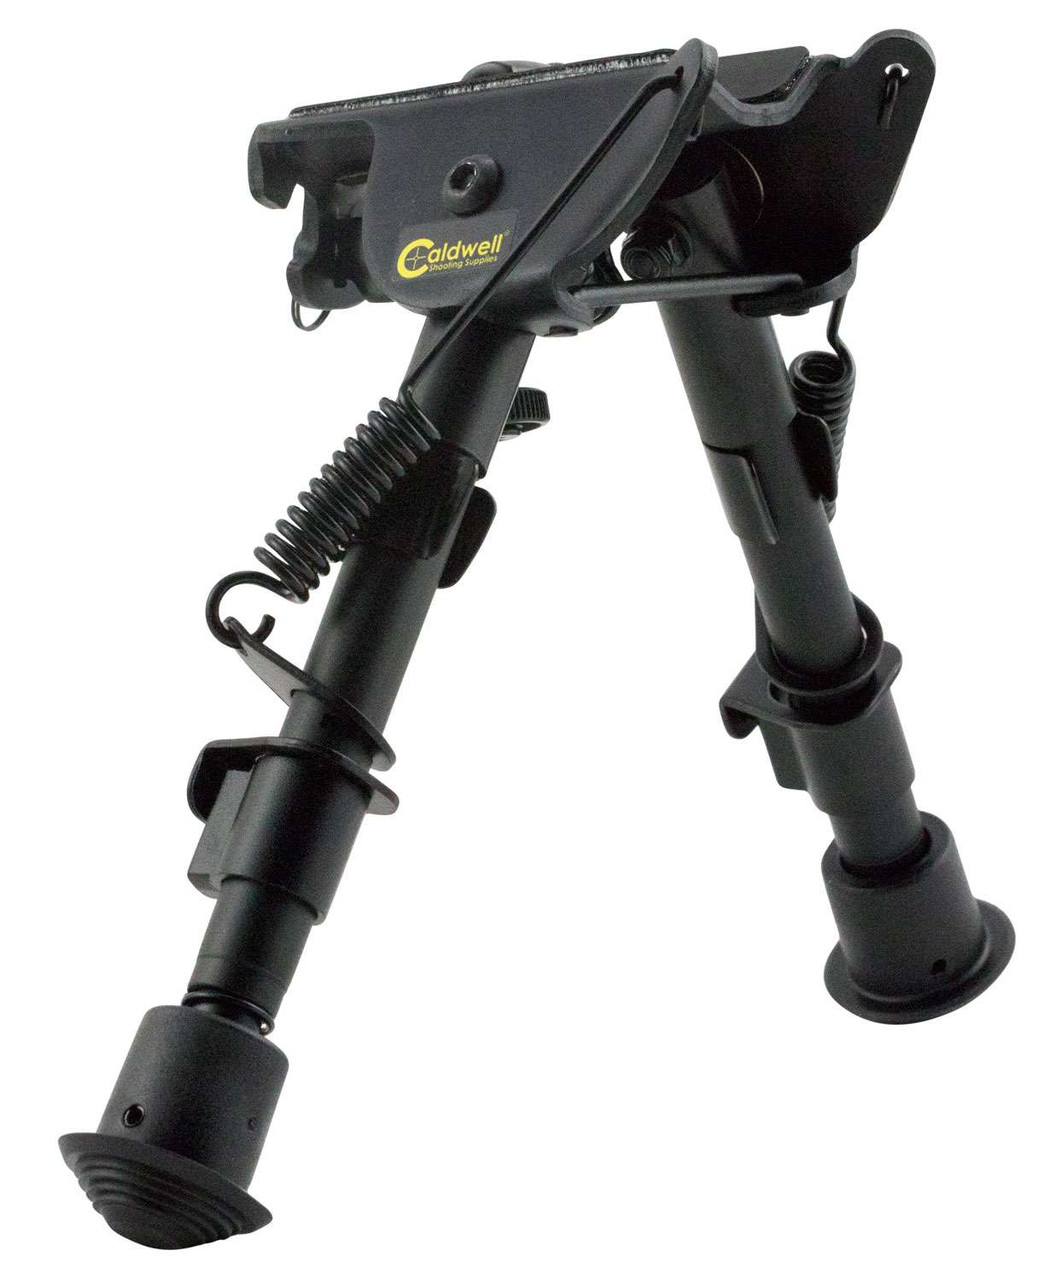 The Caldwell XLA Bipods provide a stable shooting support that conveniently attaches to almost any firearm with a sling swivel stud. XLA bipods solidly clamp to the swivel stud of the firearm and remain firmly in place without swiveling or twisting while shooting. The lightweight aluminum design adds minimal weight and deploys quickly, with legs that instantly spring out to the shooting position with the touch of a button. The legs are notched for easy indexing to a specific height. There is a connection point for sling attachment and multi section legs that collapse forward allowing for convenient carry of the firearm.

Lightweight aluminum design
Legs that instantly spring out to the shooting position with the touch of a button
Legs collapse forward for transport
Durable rubber feet provide enhanced stability
Padded base protects firearm fore-end